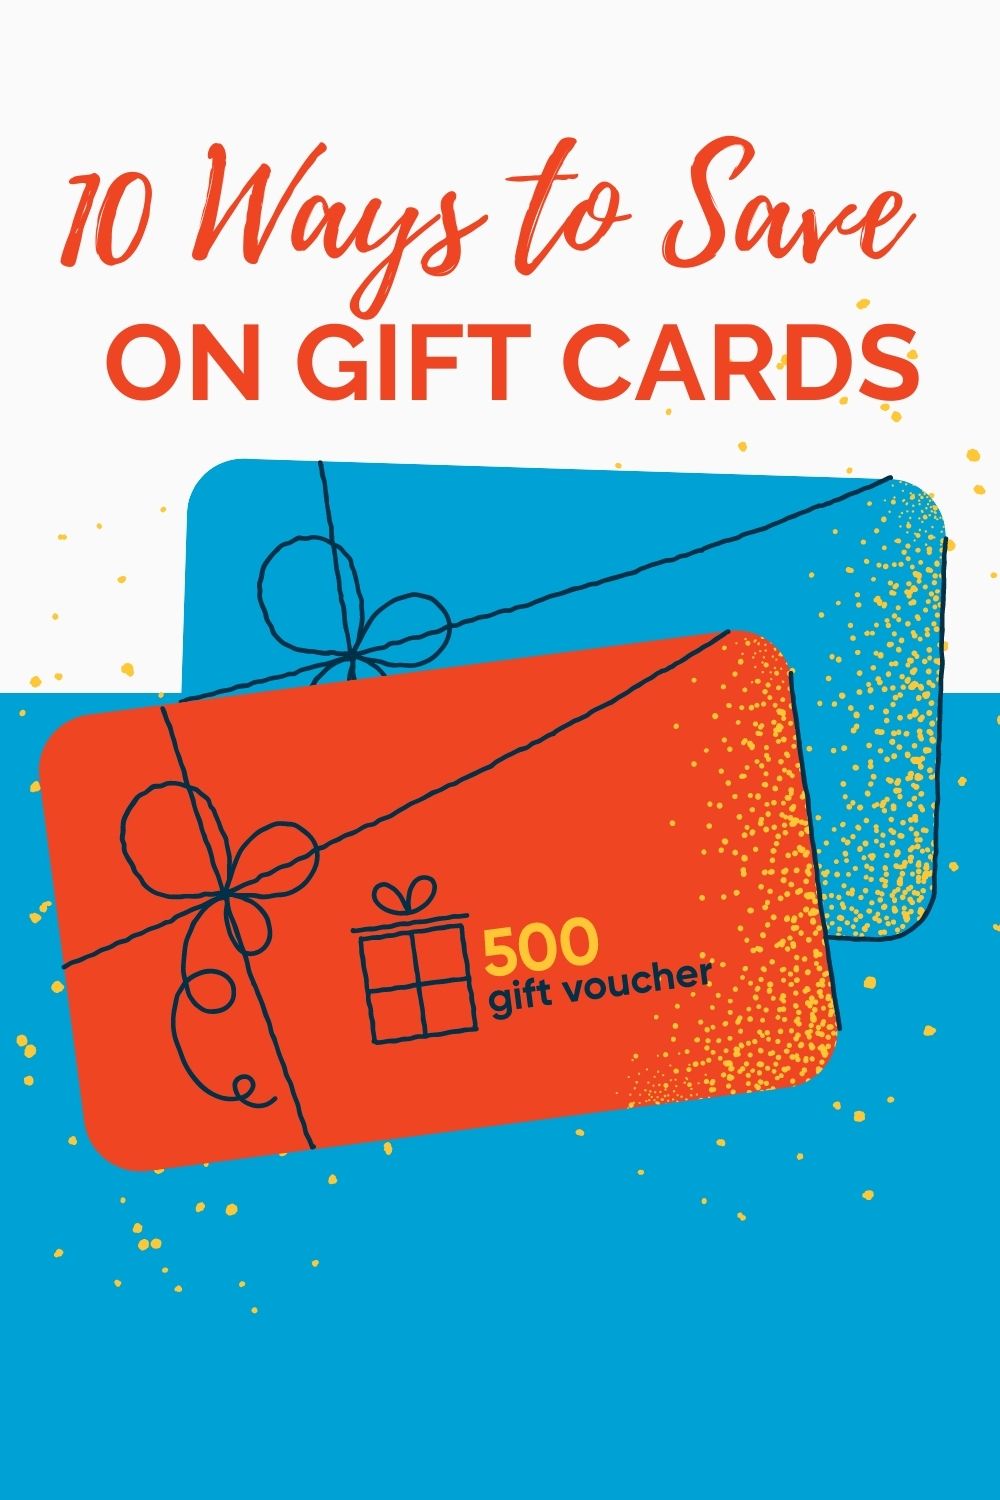 10 Ways to Save on Gift Cards